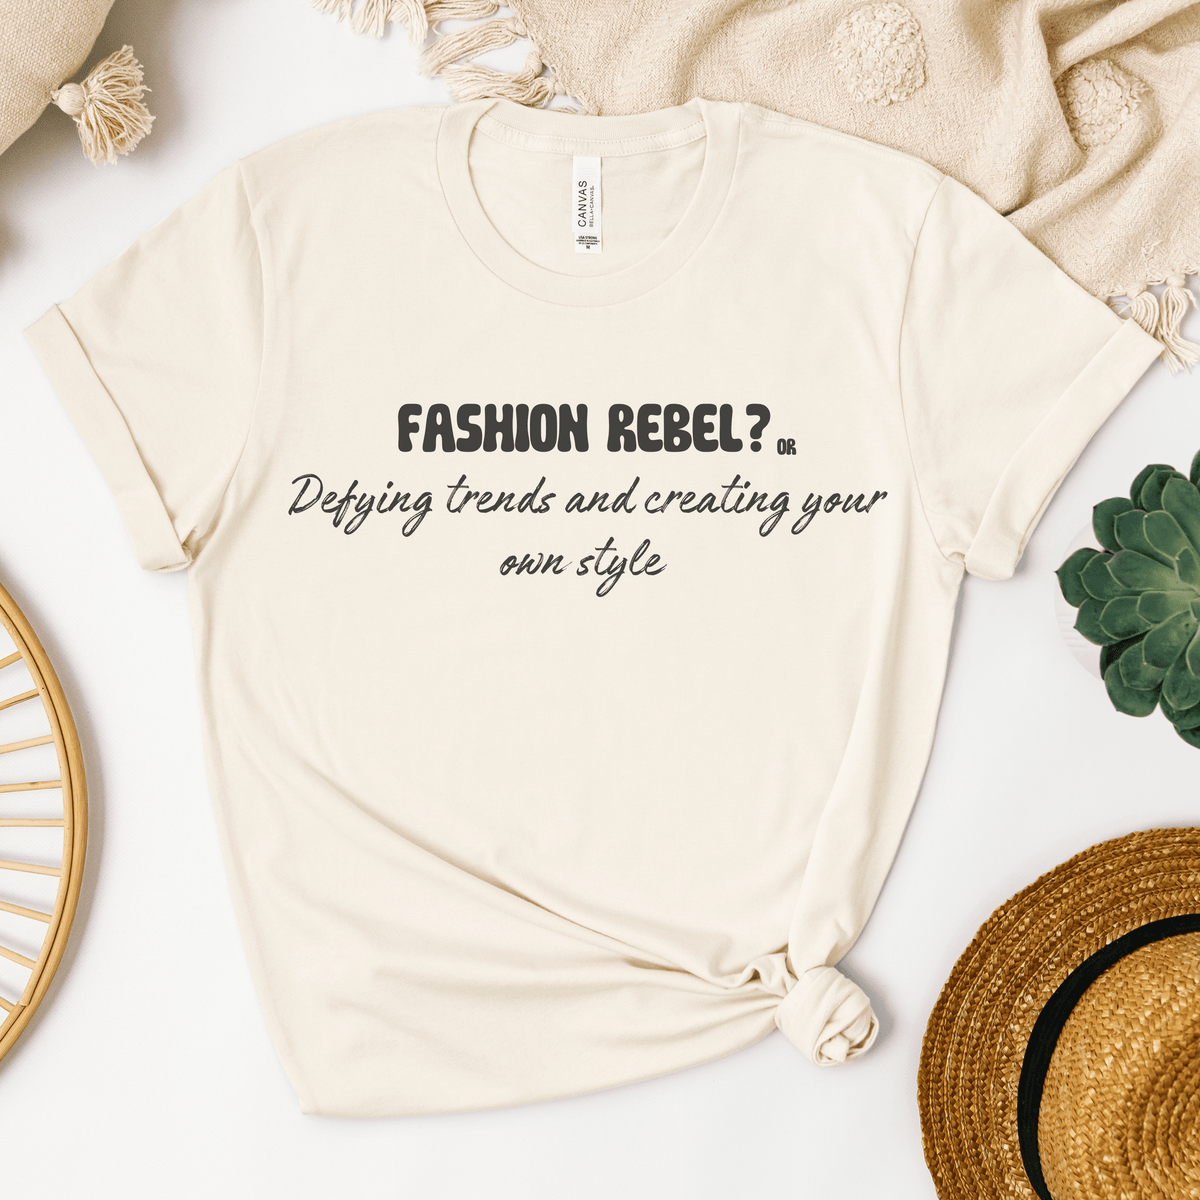 Fashion rebel? or Defying trends and creating your own style T-shirt